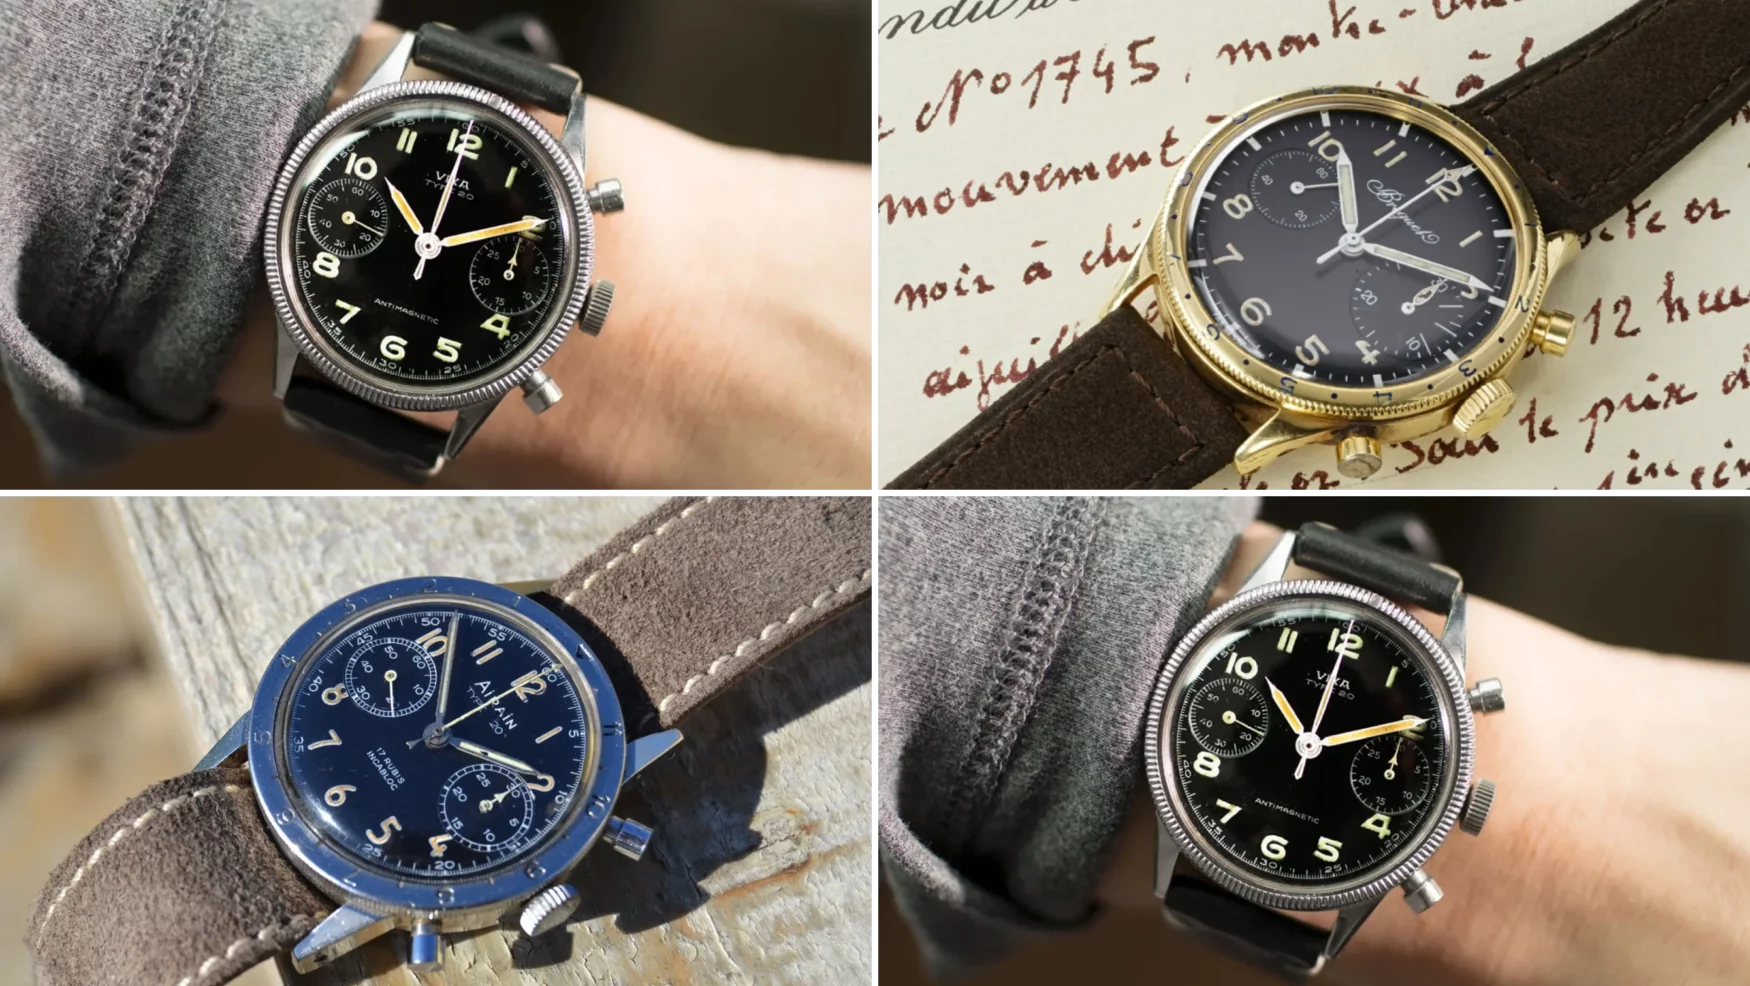 How time shaped the Type 20 chronograph, and the brands that keep the legend alive